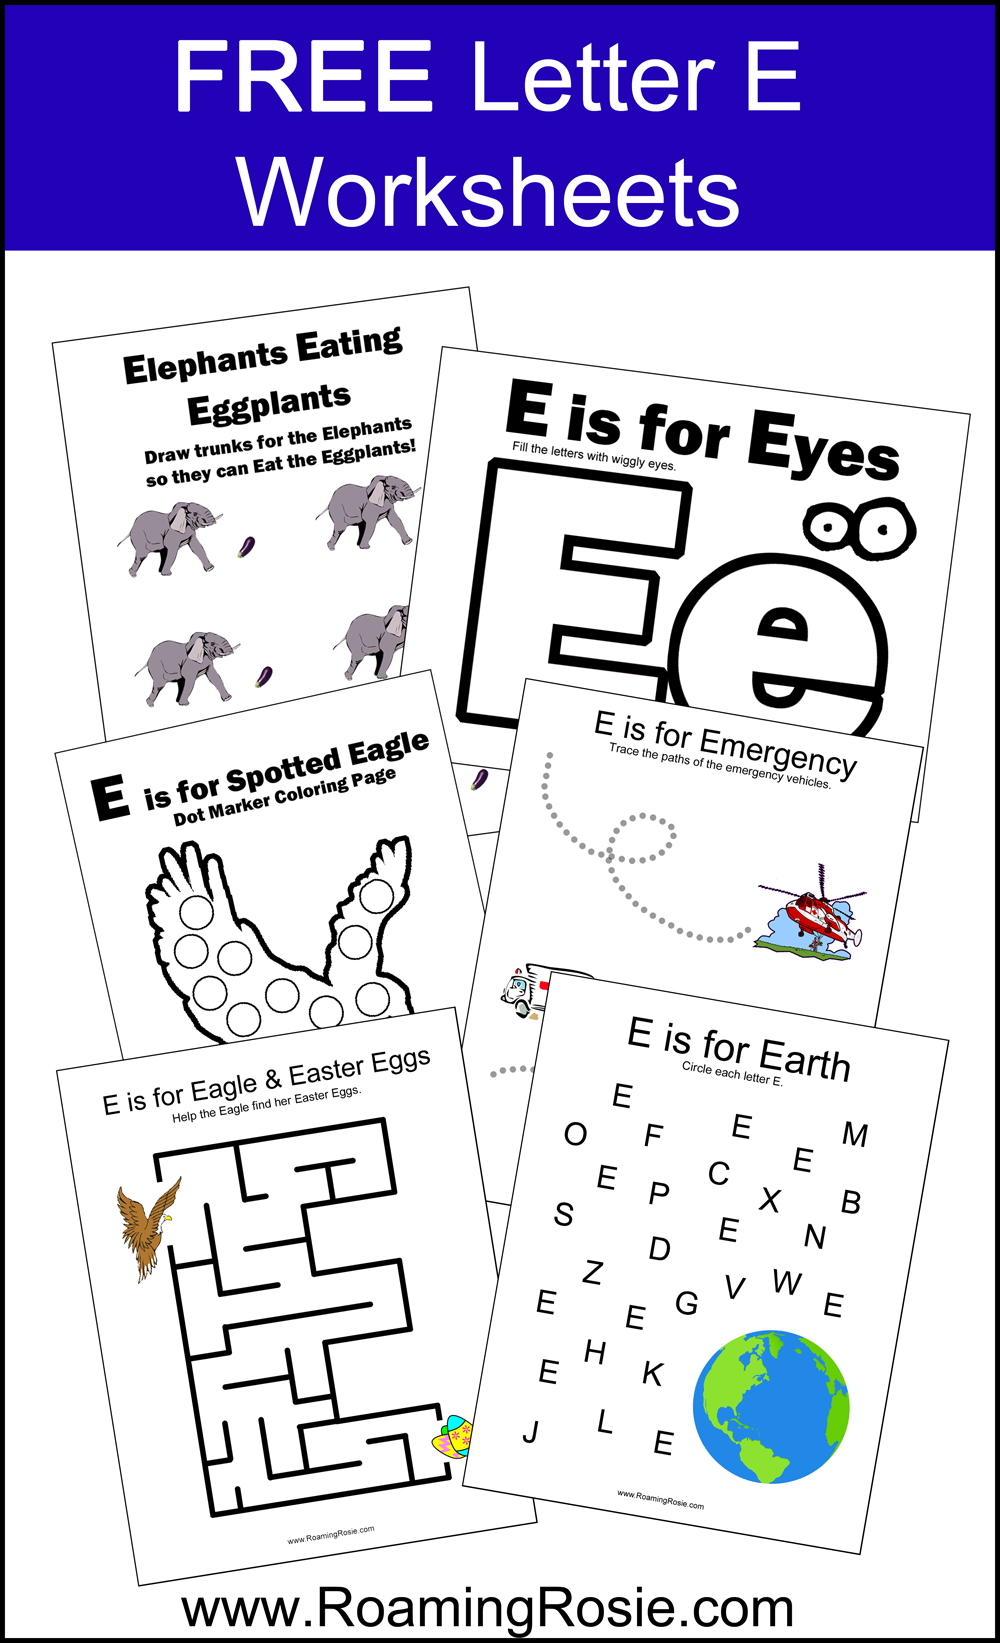 6-best-images-of-free-printable-letter-e-free-printable-letter-e